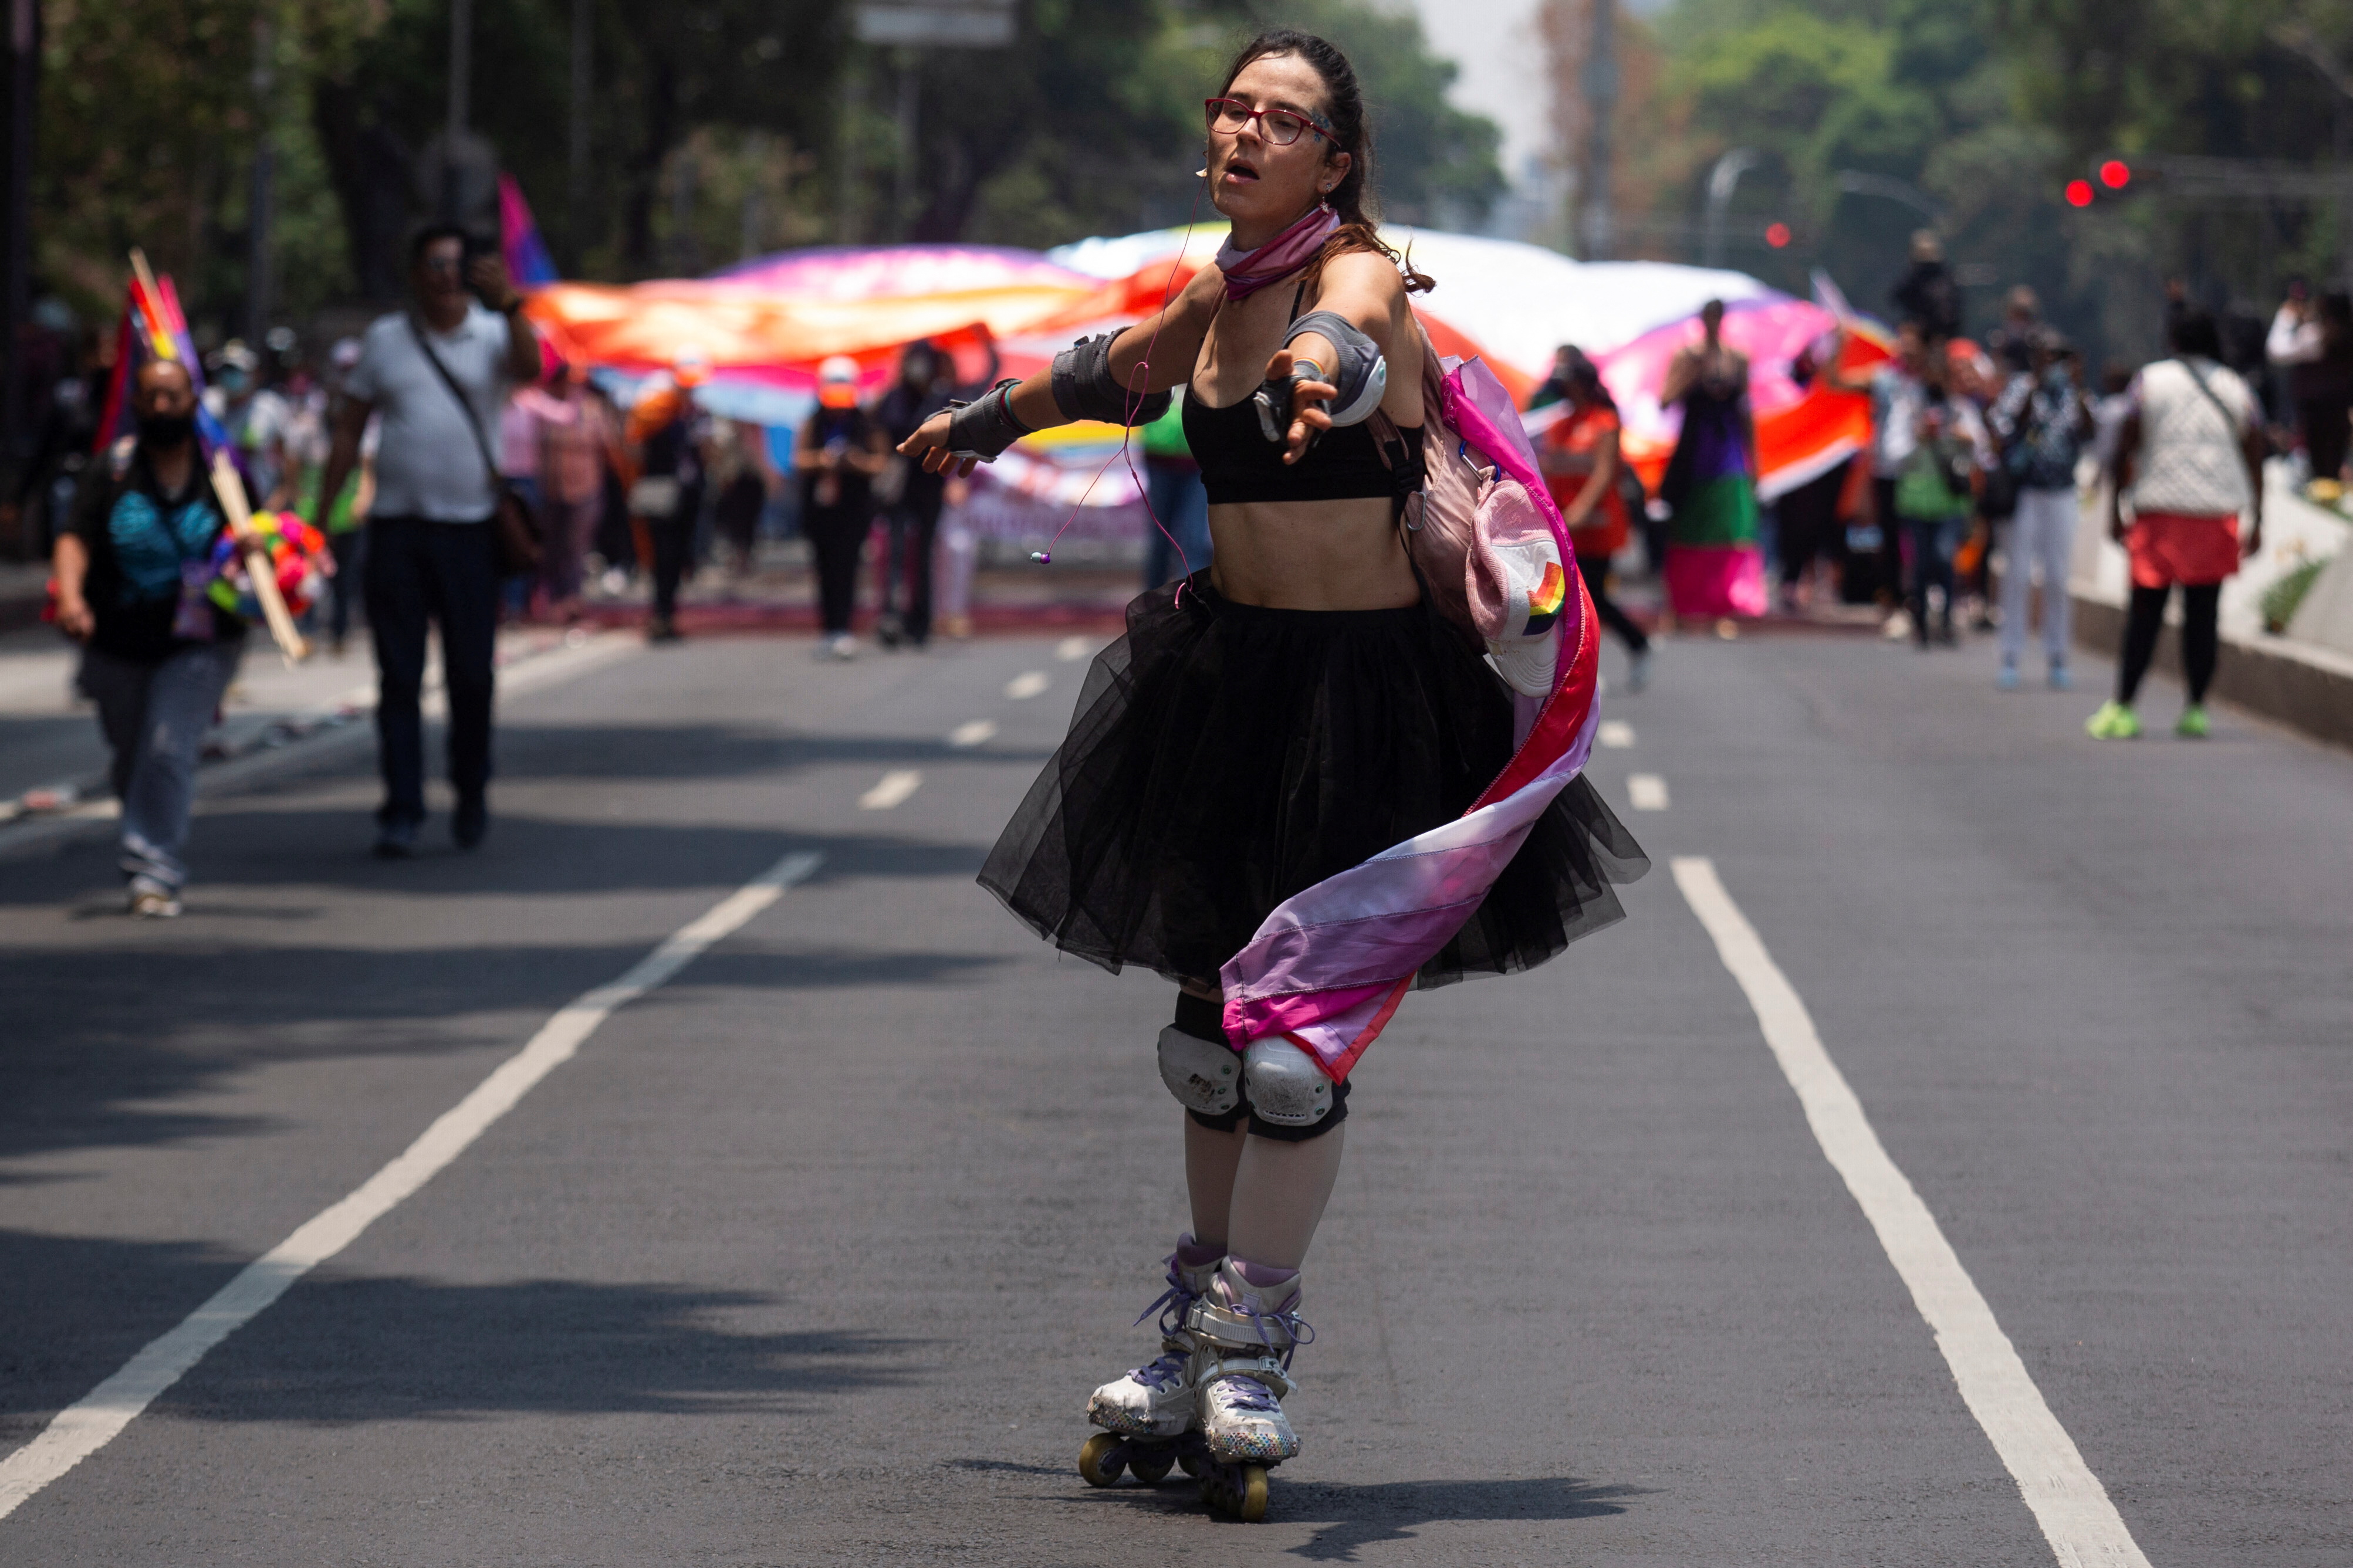 A demonstrator in roller skates takes part in an LGBT protest named "Marcha Lencha 2022" against gender violence and to demand respect for their human rights, in Mexico City, Mexico June 18, 2022. REUTERS/Quetzalli Nicte-Ha